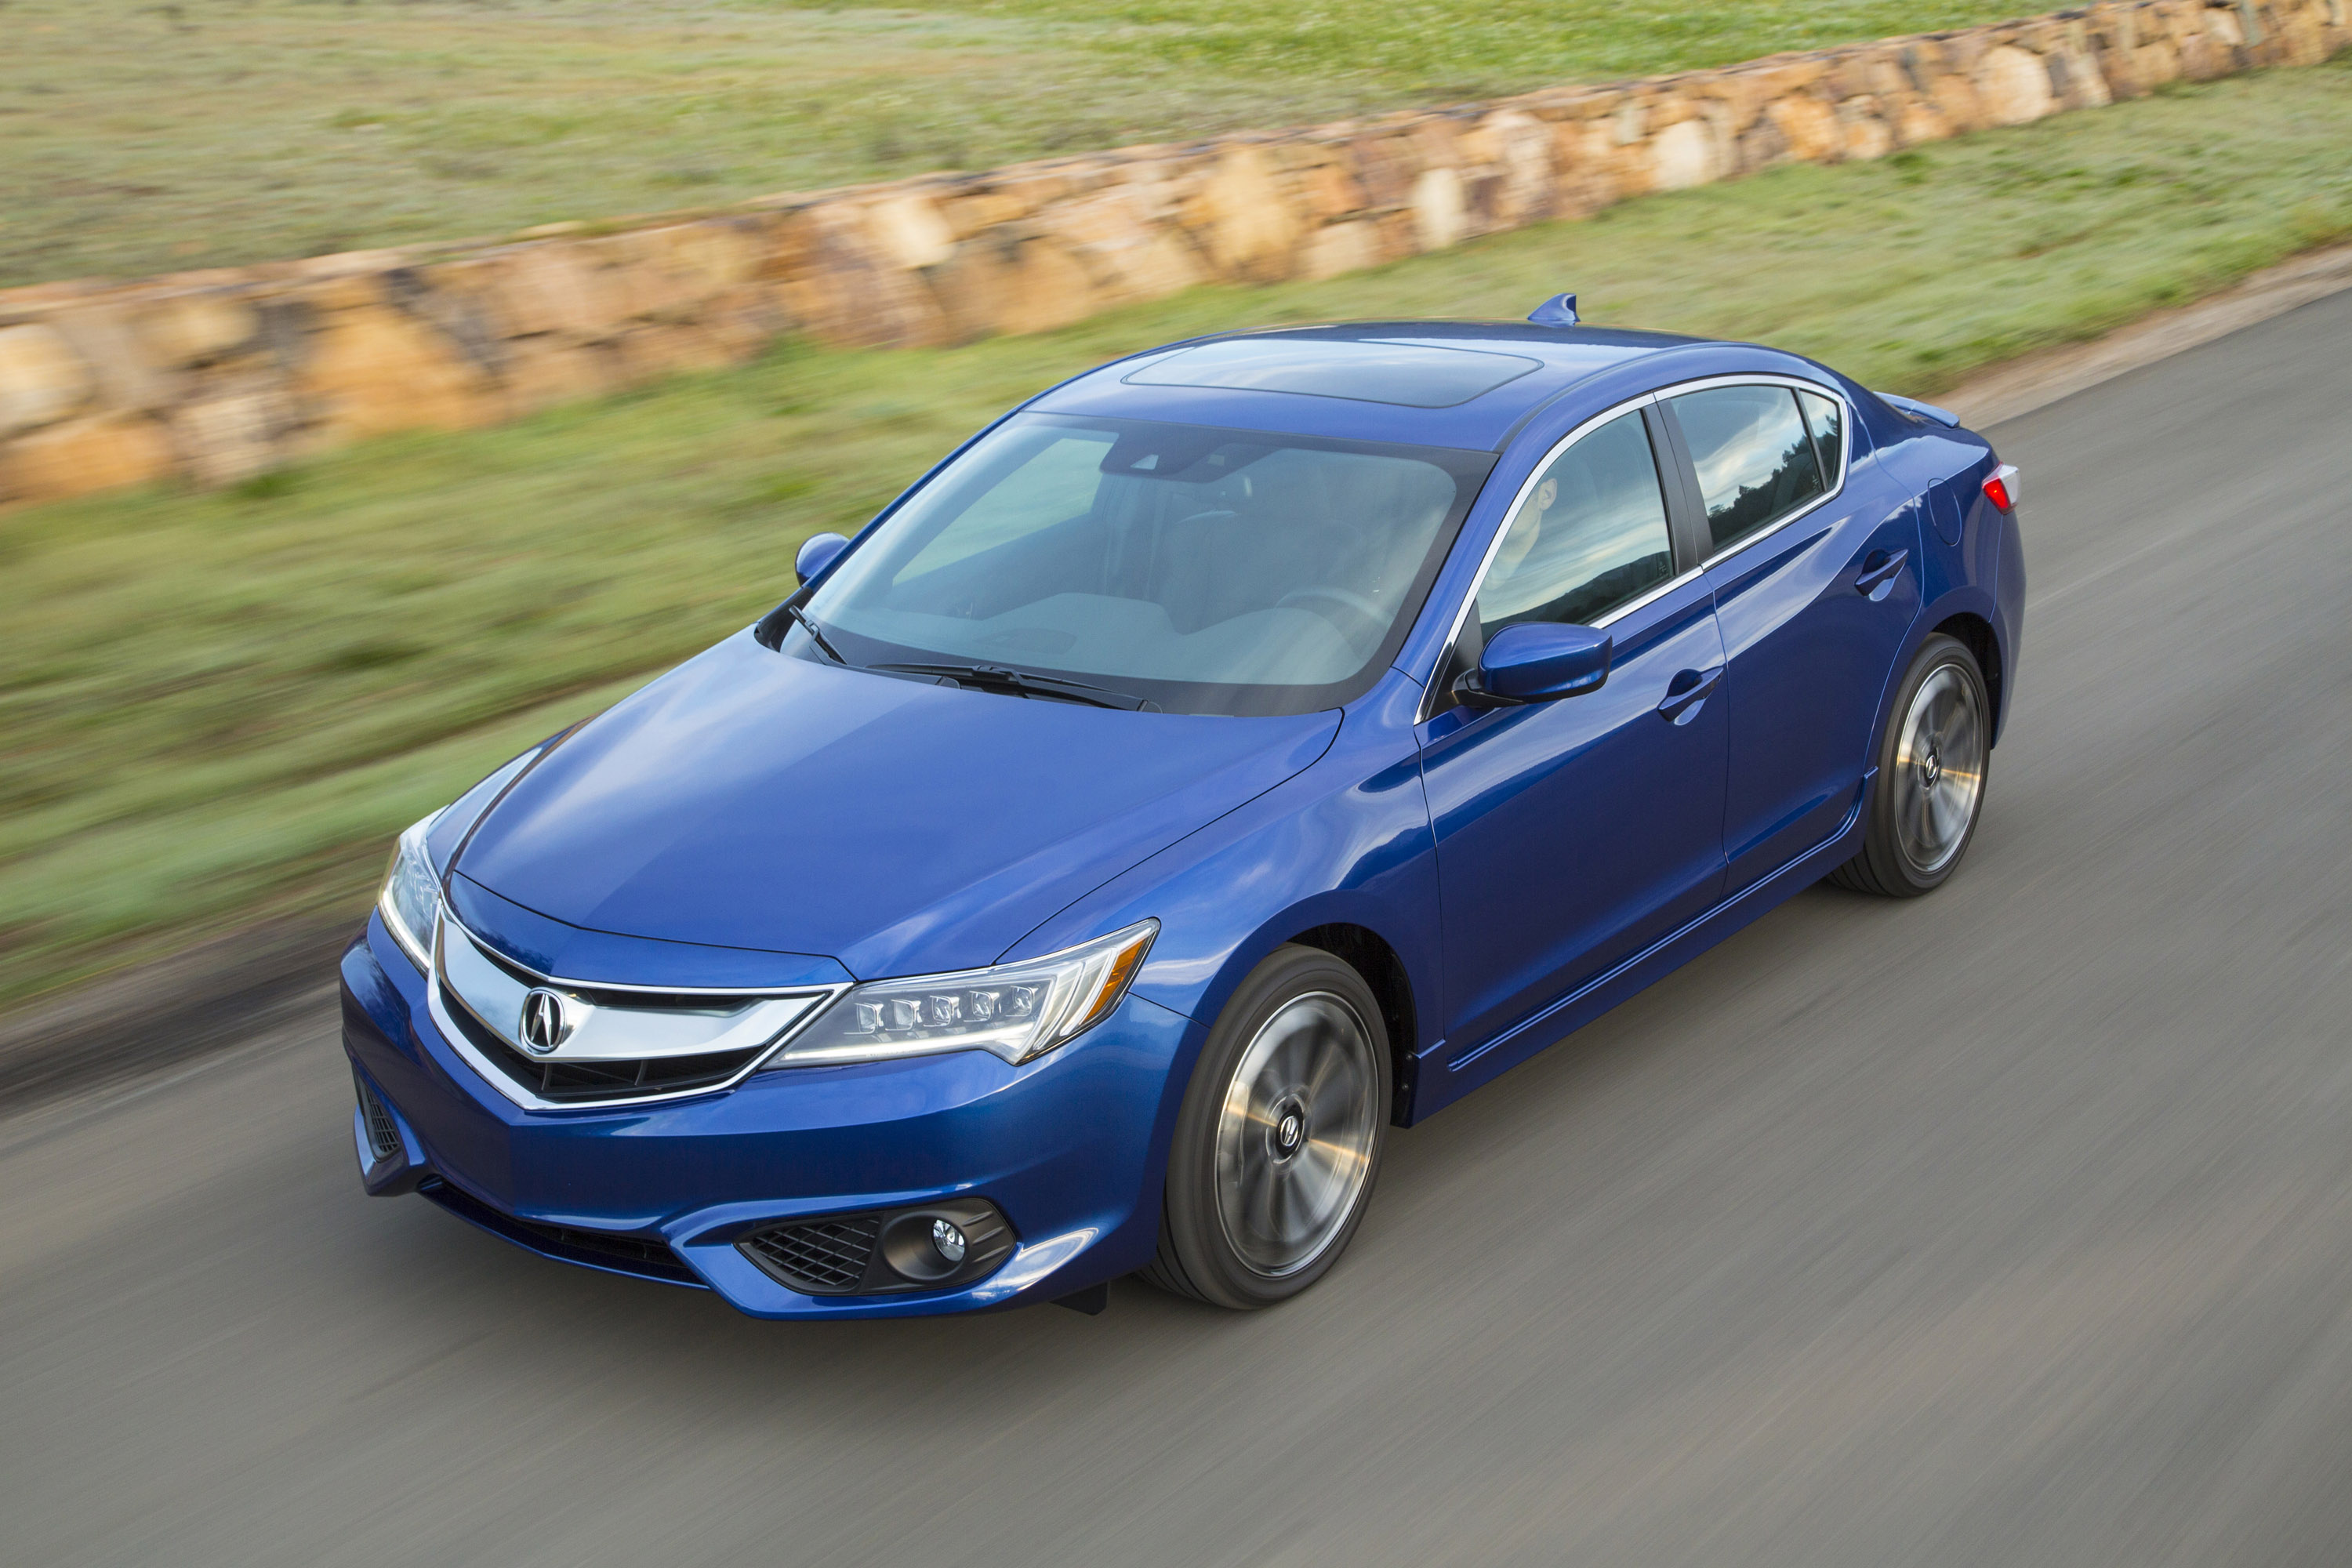 Acura ILX, High-definition picture, Modern and sleek, Dynamic performance, 3000x2000 HD Desktop